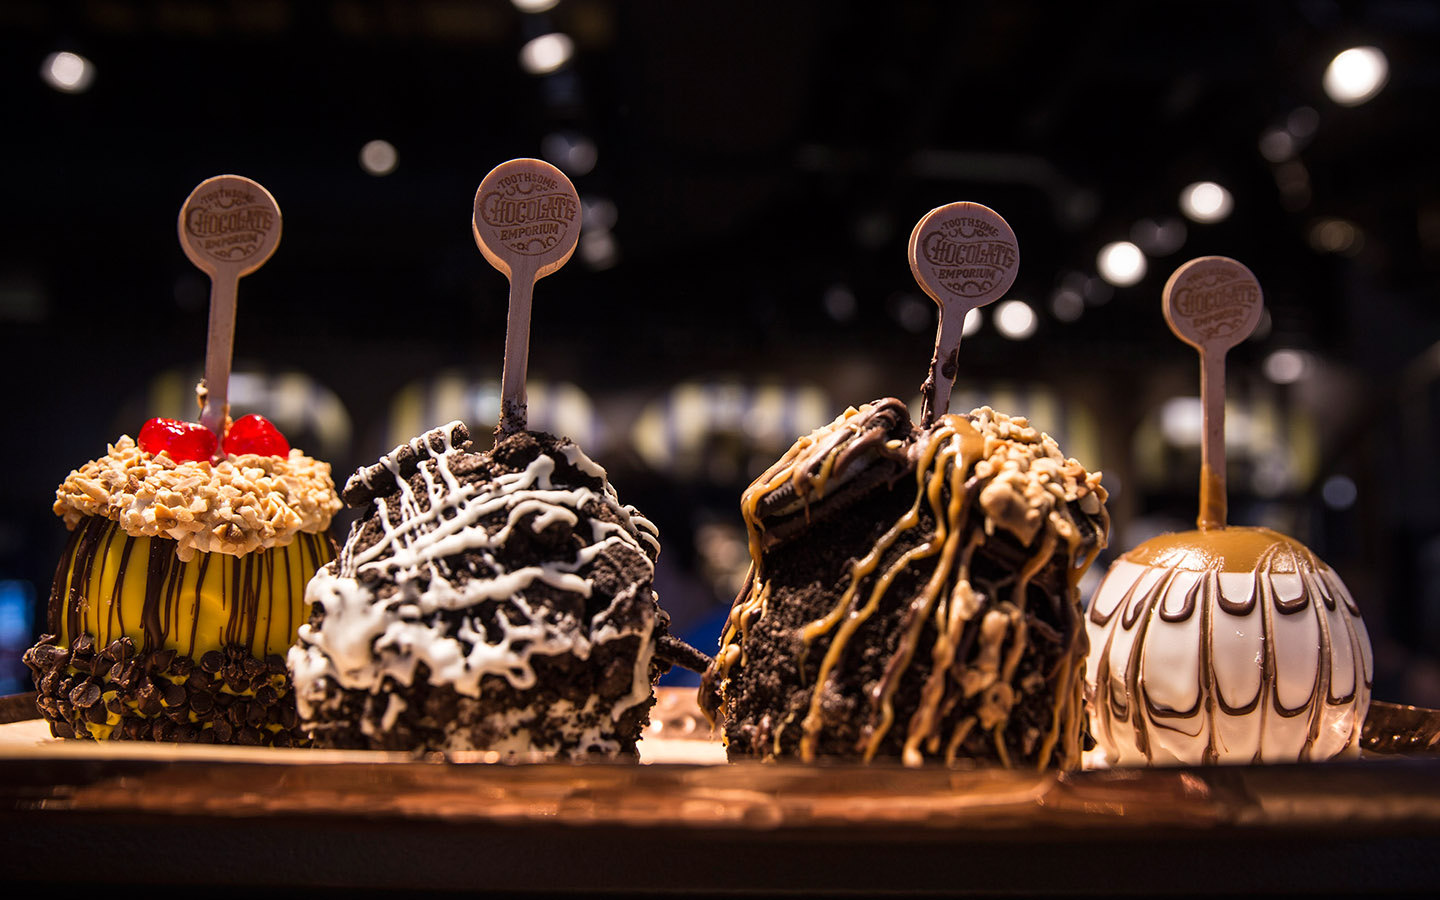 Sink your teeth into gourmet candy apples at Universal Orlando Resort.